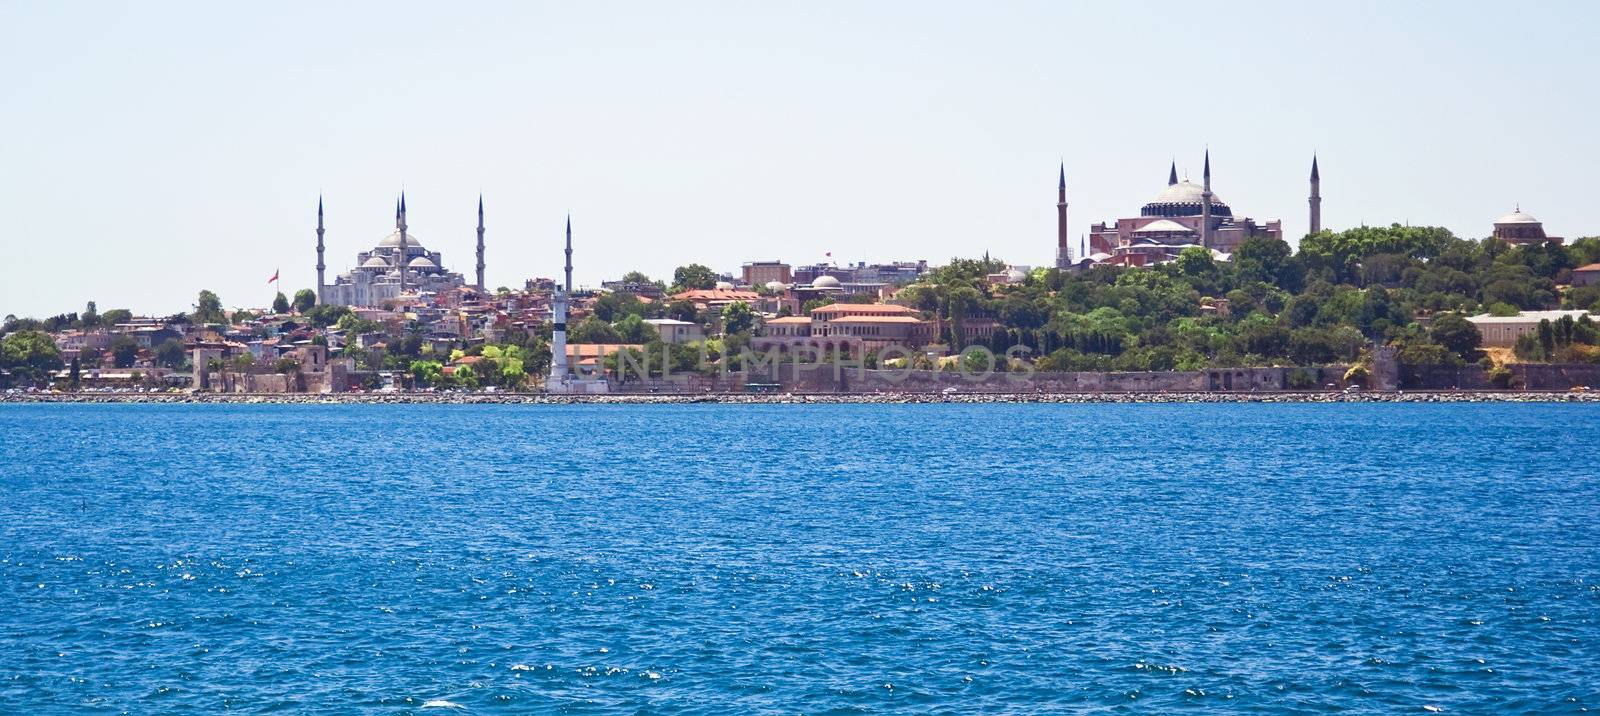 Panoramic view of Istanbul by sailorr